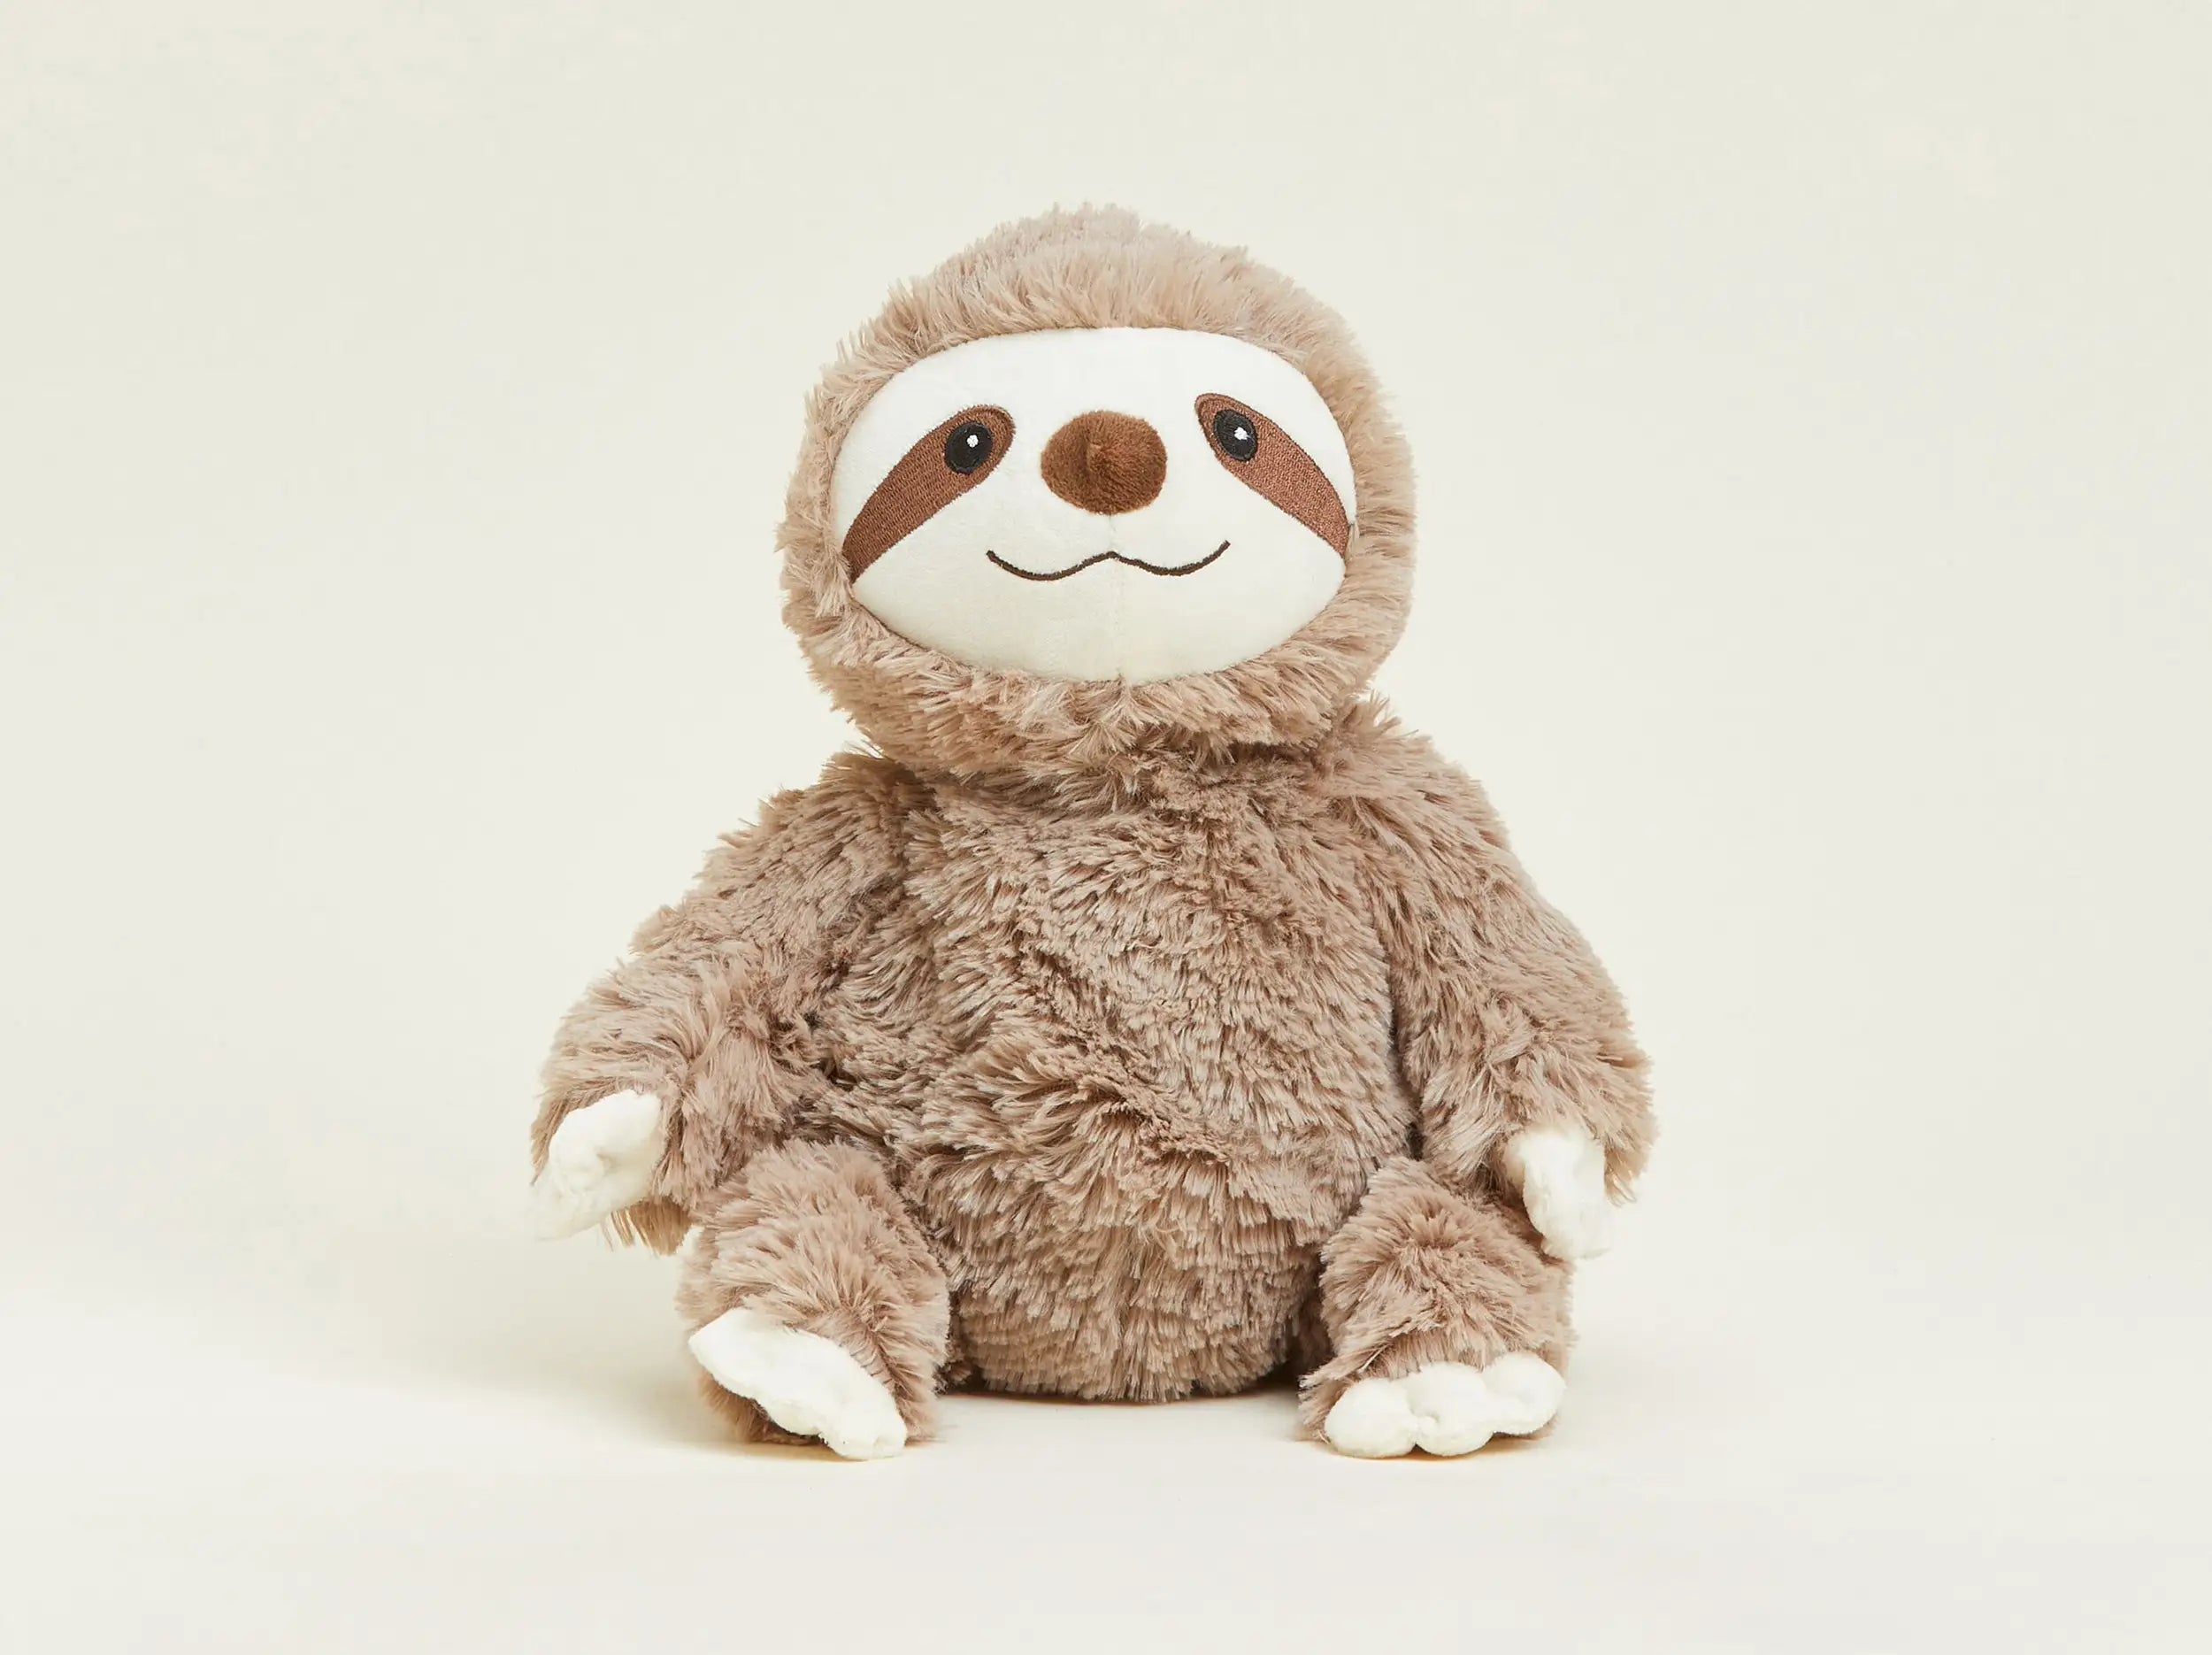 Plush toy of a sloth